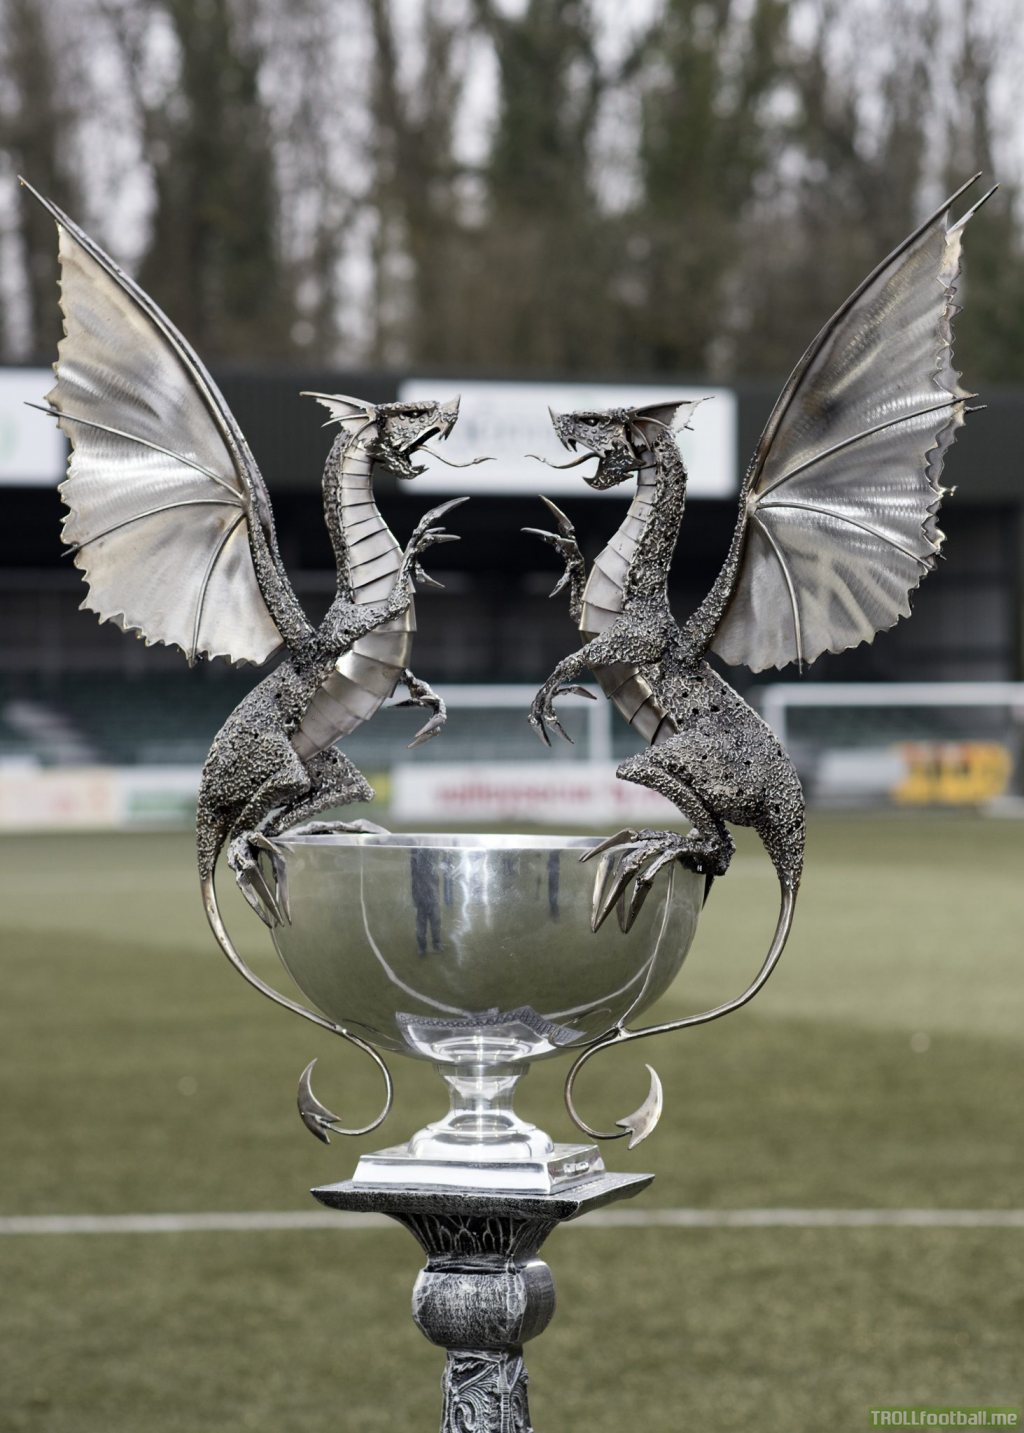 The Welsh Premier League trophy is the coolest trophy in the world.